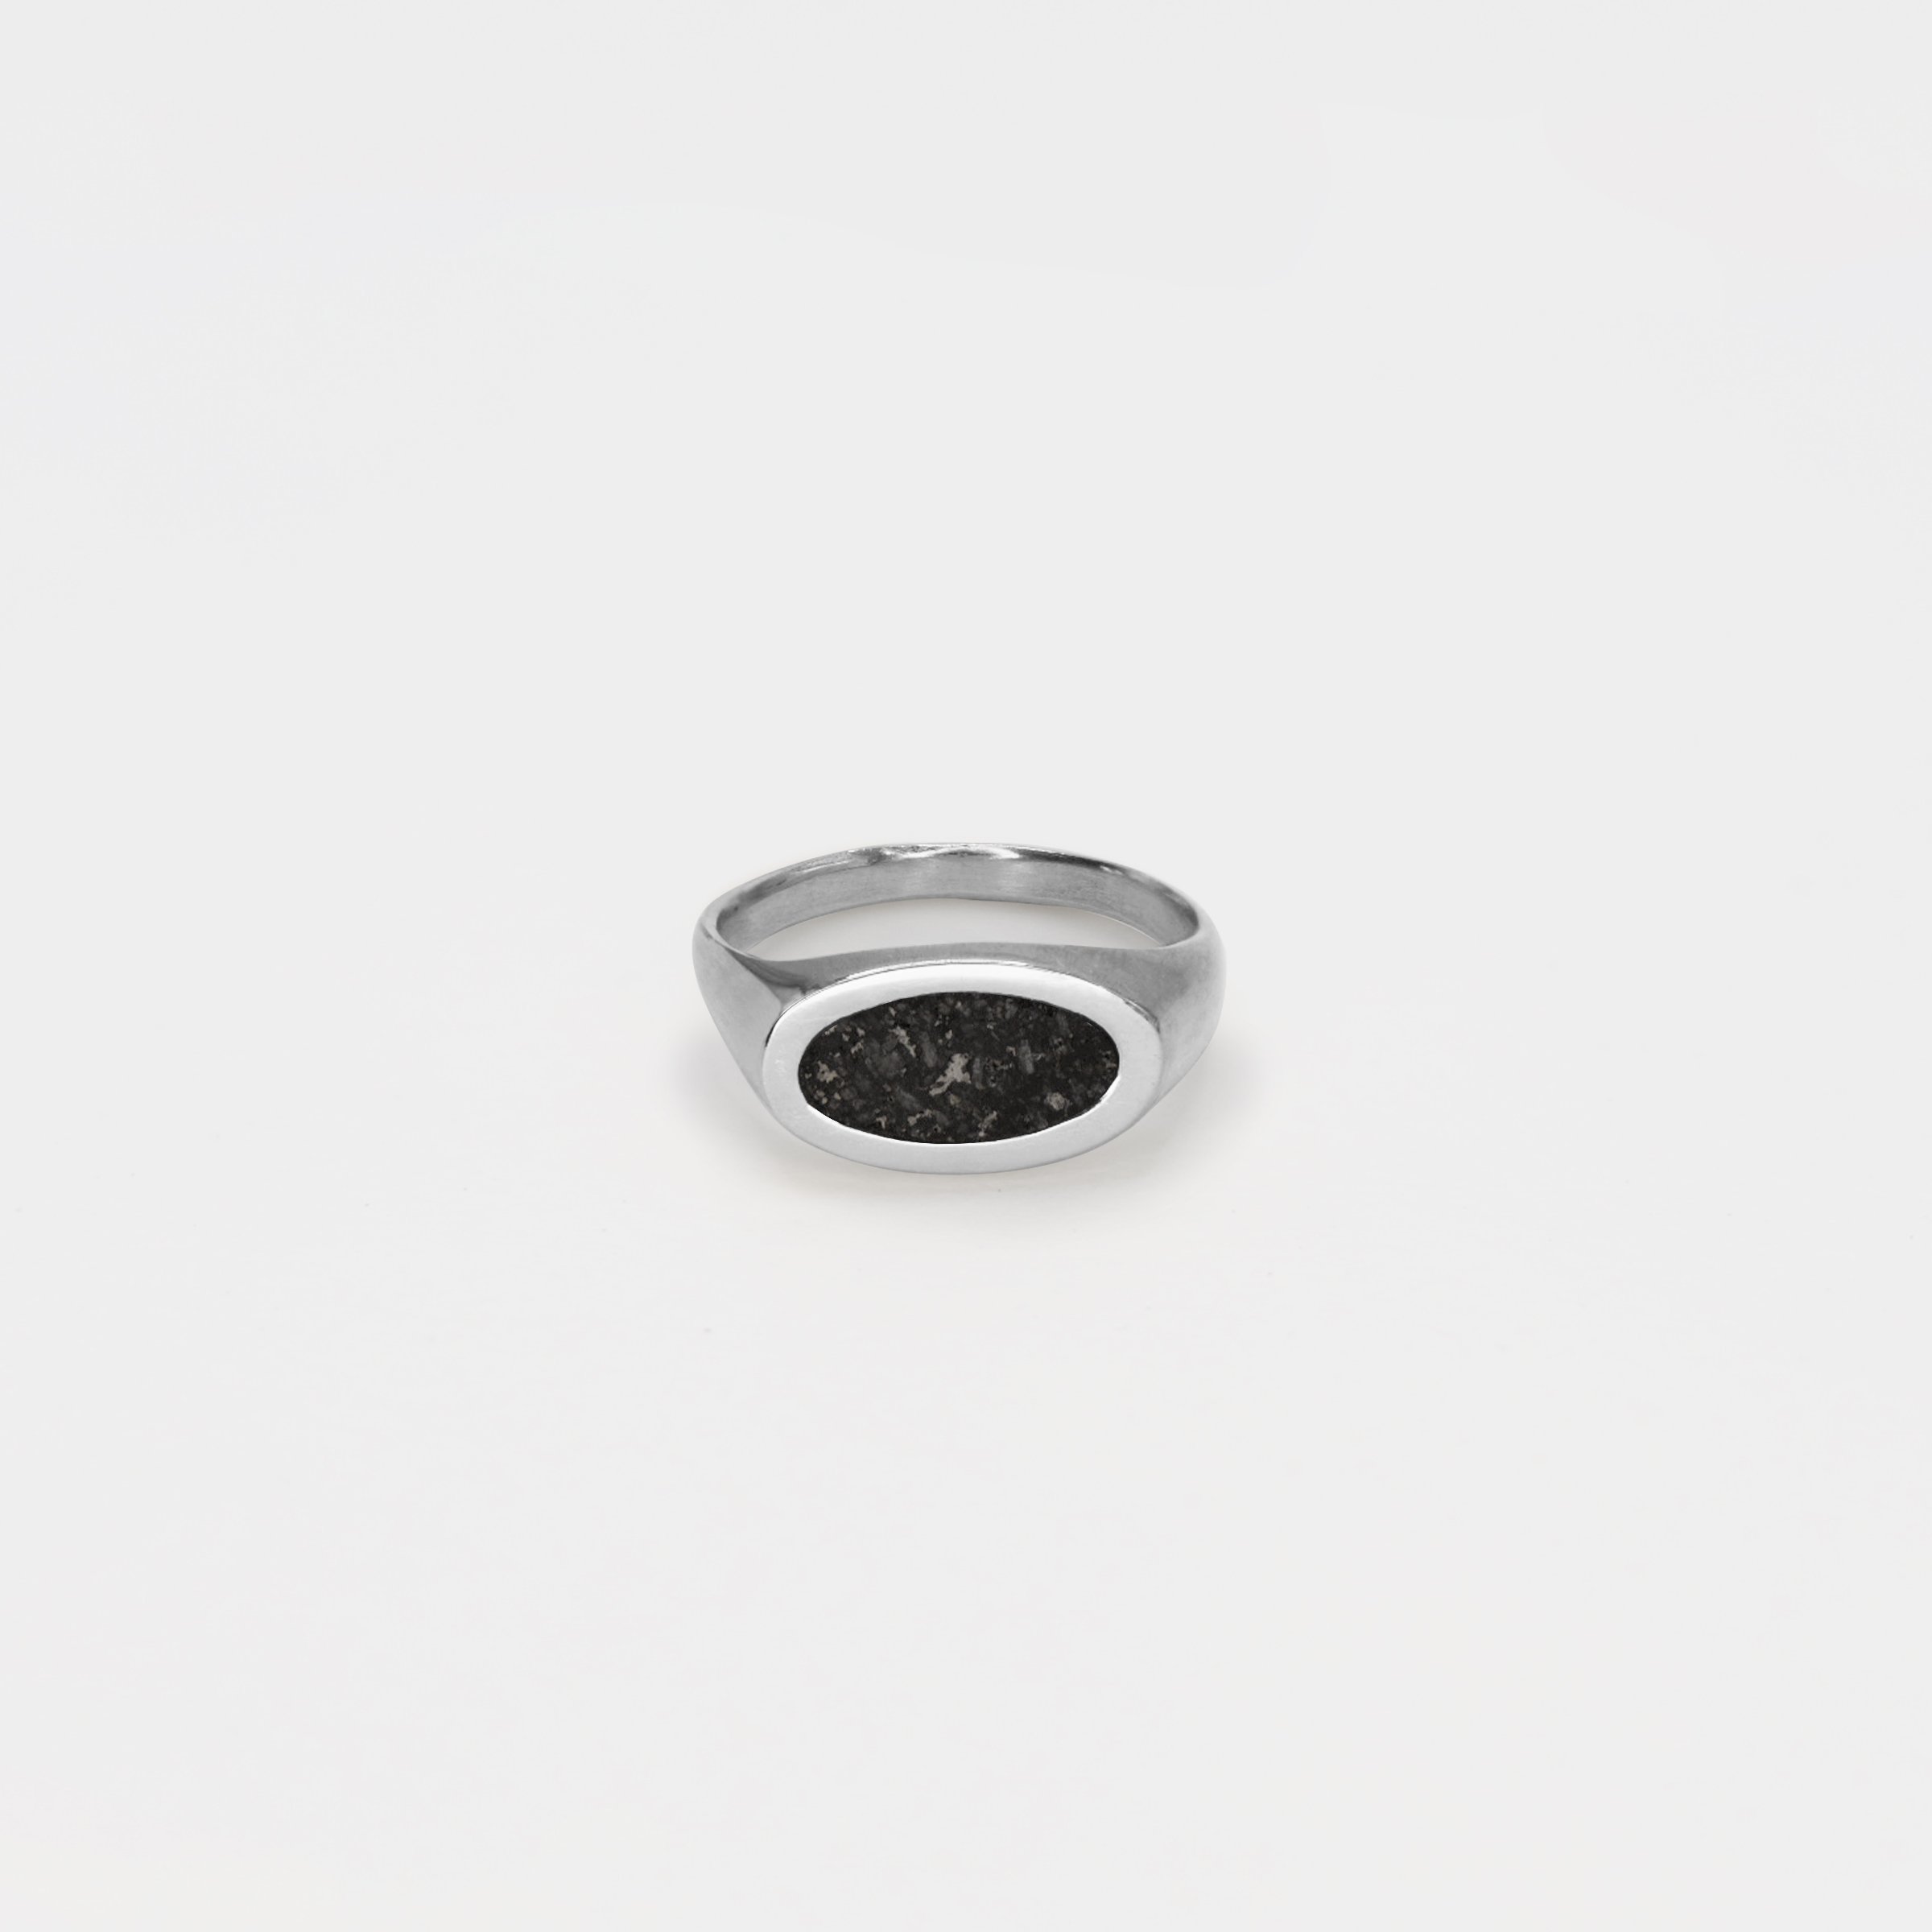 The Small Pedestal Ring Silver Volcanic Rock.jpg